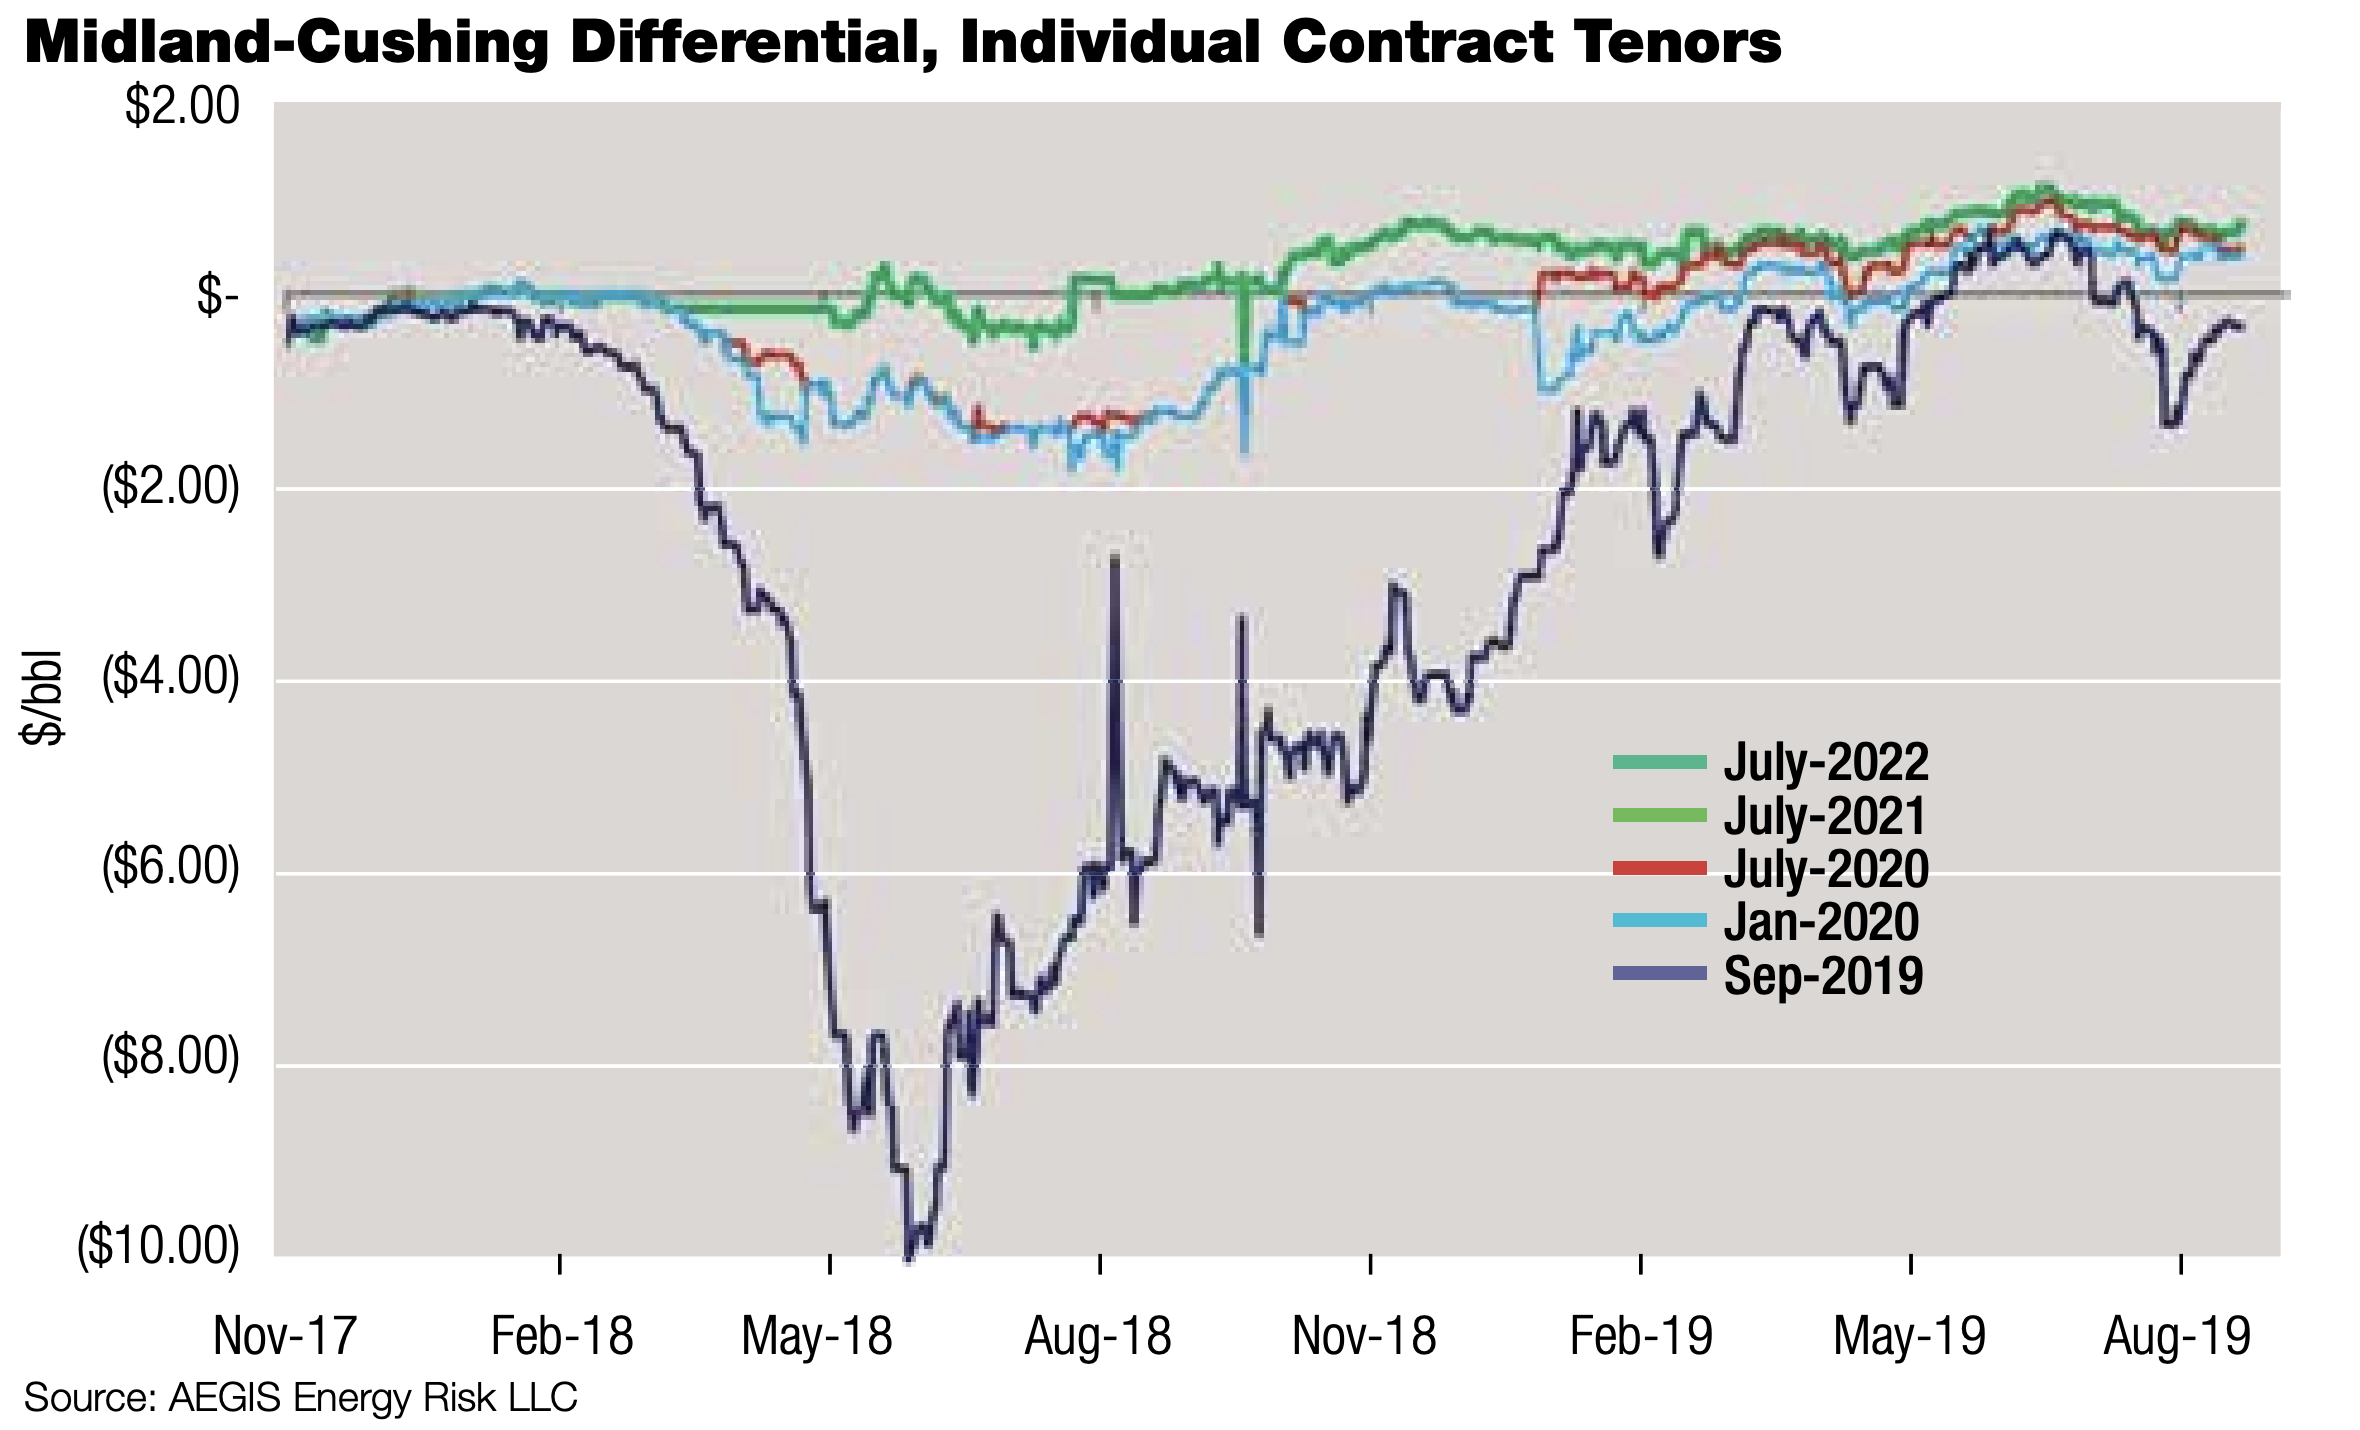 Midland-Cushing Differential, Individual Contract Tenors (Source: AEGIS Energy Risk LLC)